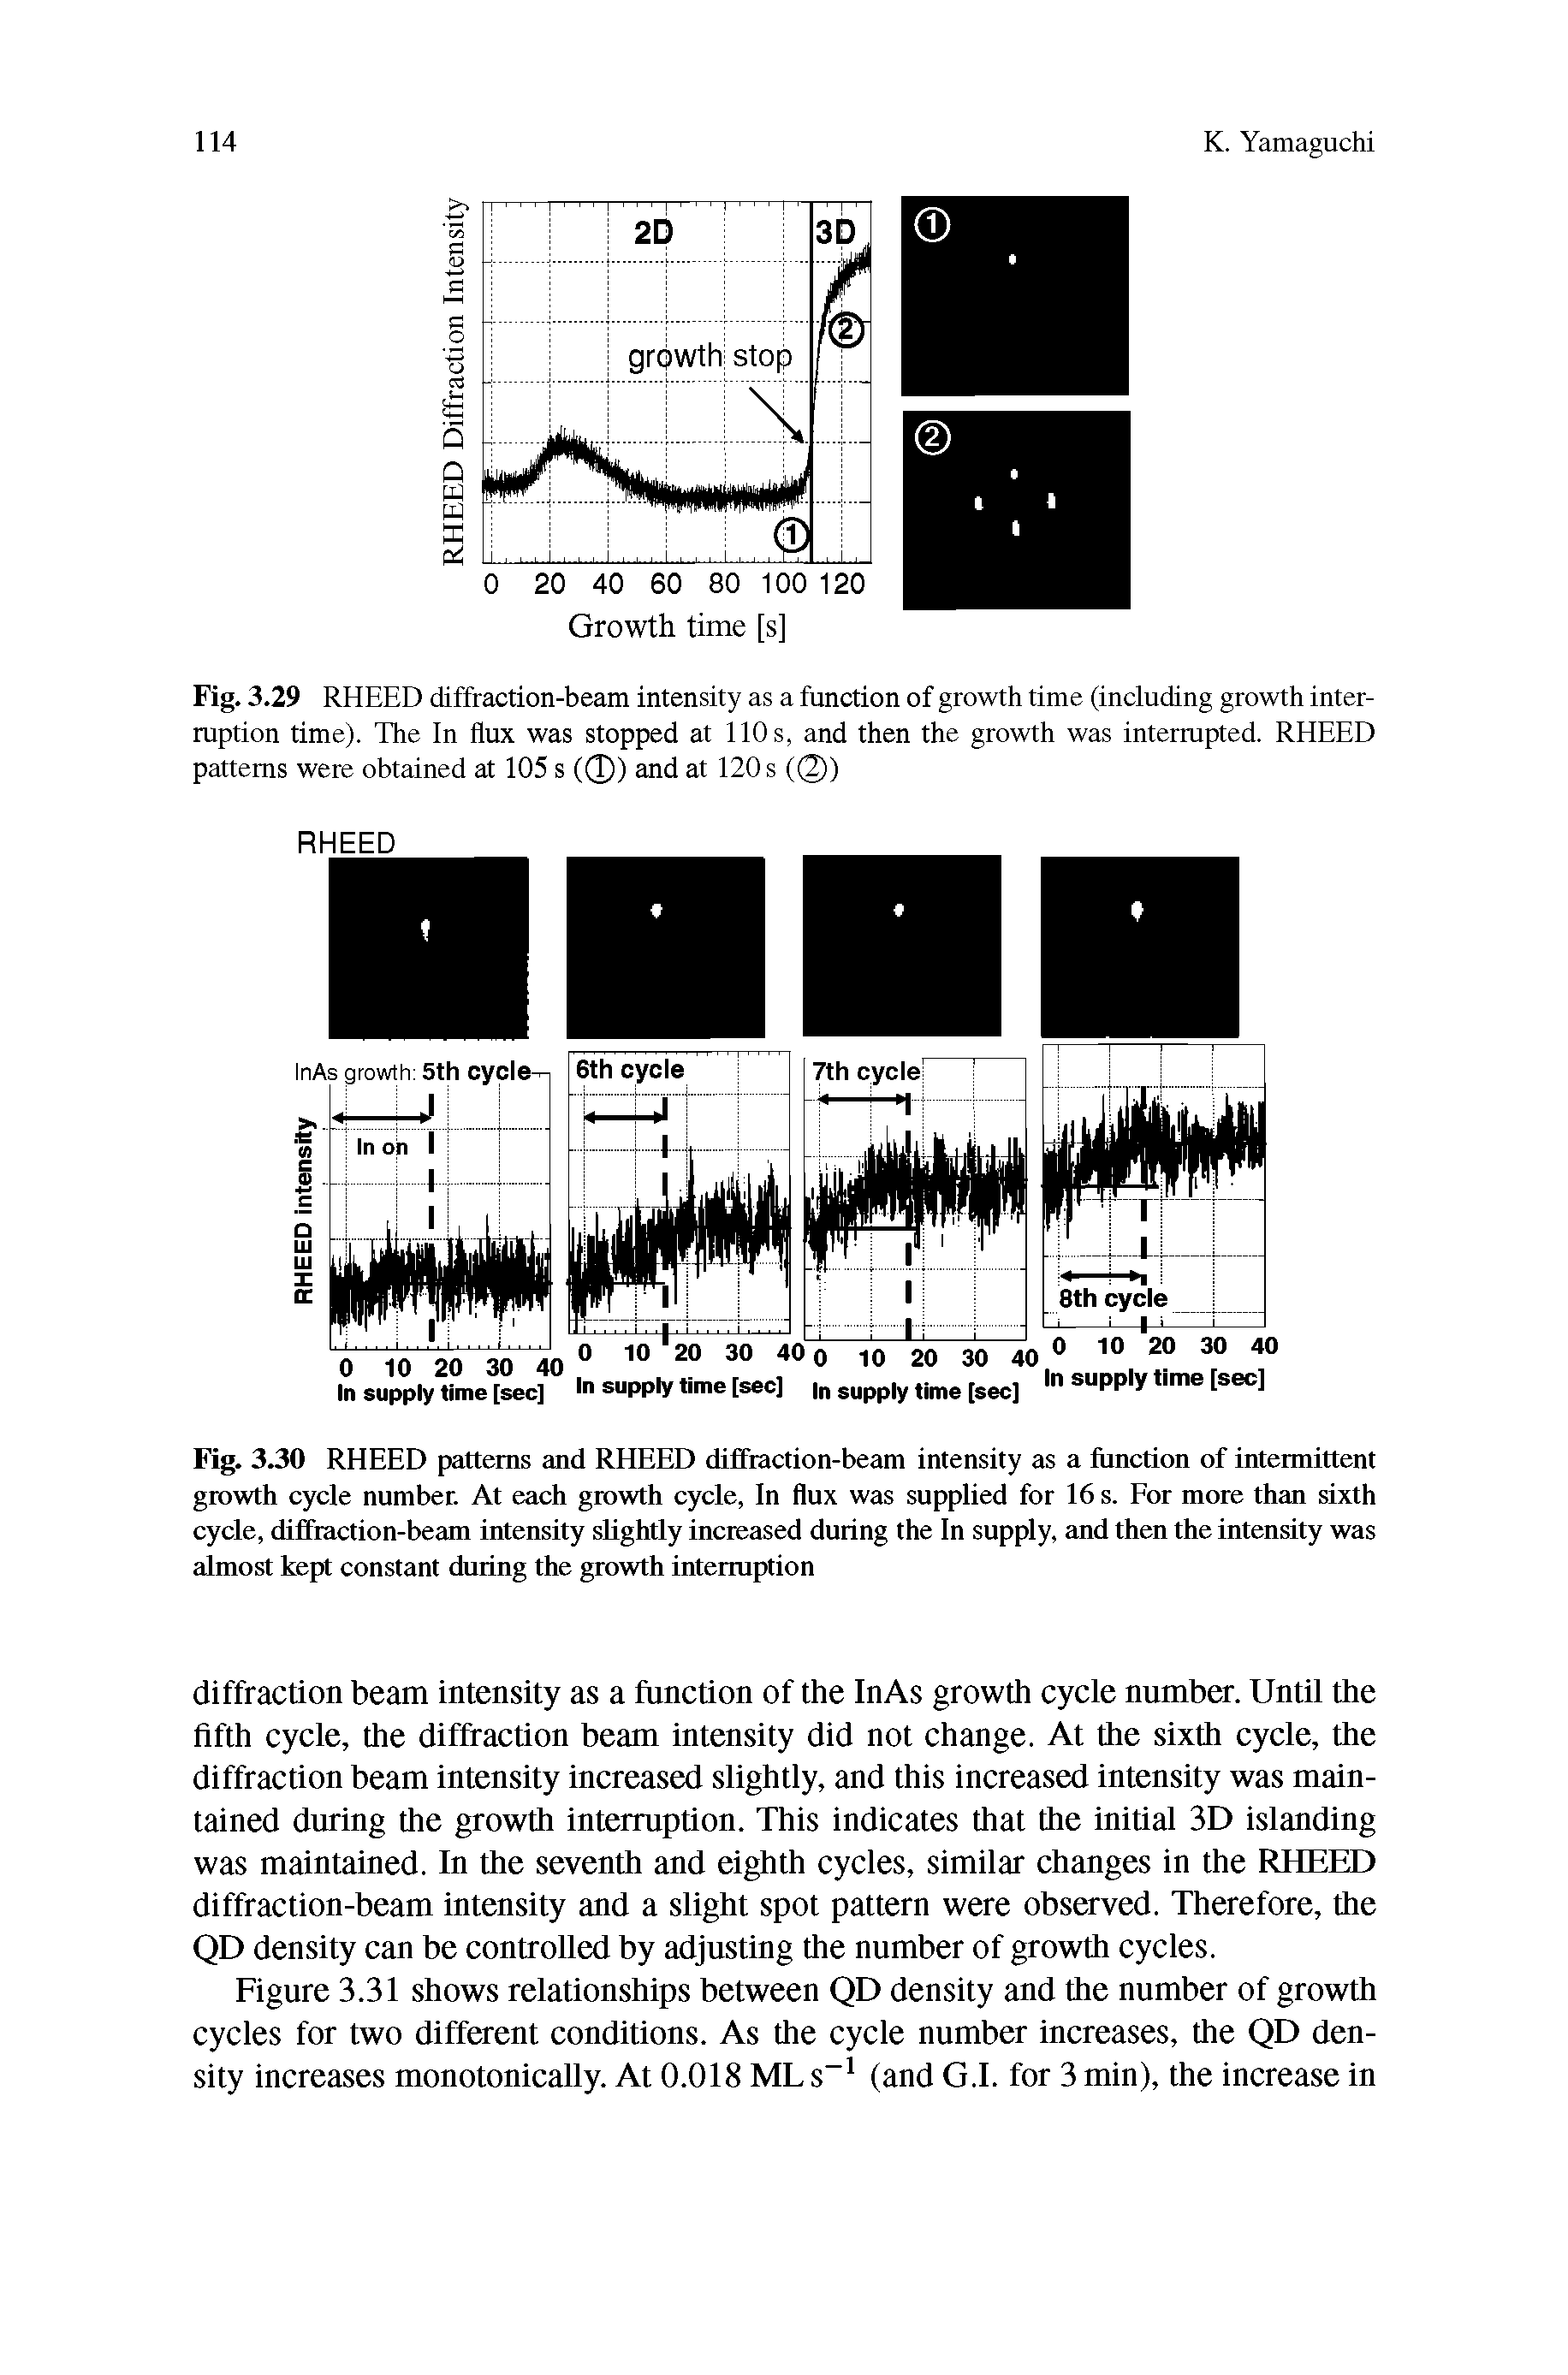 Fig. 3.30 RHEED patterns and RHEED diffraction-beam intensity as a function of intermittent growth cycle number At each growth cycle. In flux was supplied for 16 s. For more than sixth cycle, diffraction-beam intensity slightly increased during the In supply, and then the intensity was almost kept constant during the growth interruption...